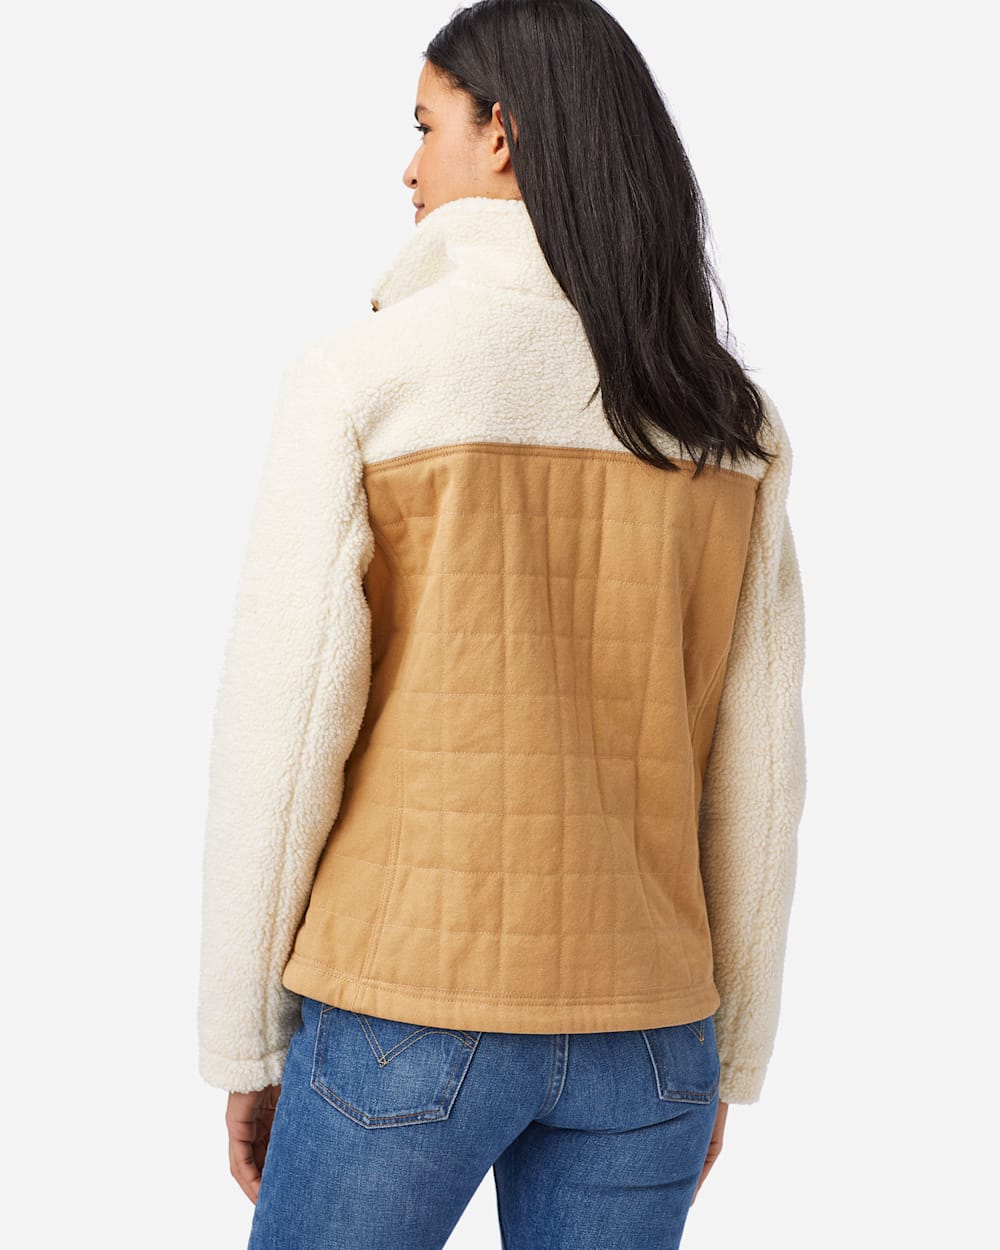 ALTERNATE VIEW OF WOMEN'S SALIDA CANVAS SHERPA JACKET IN LIGHT TAN/IVORY image number 3